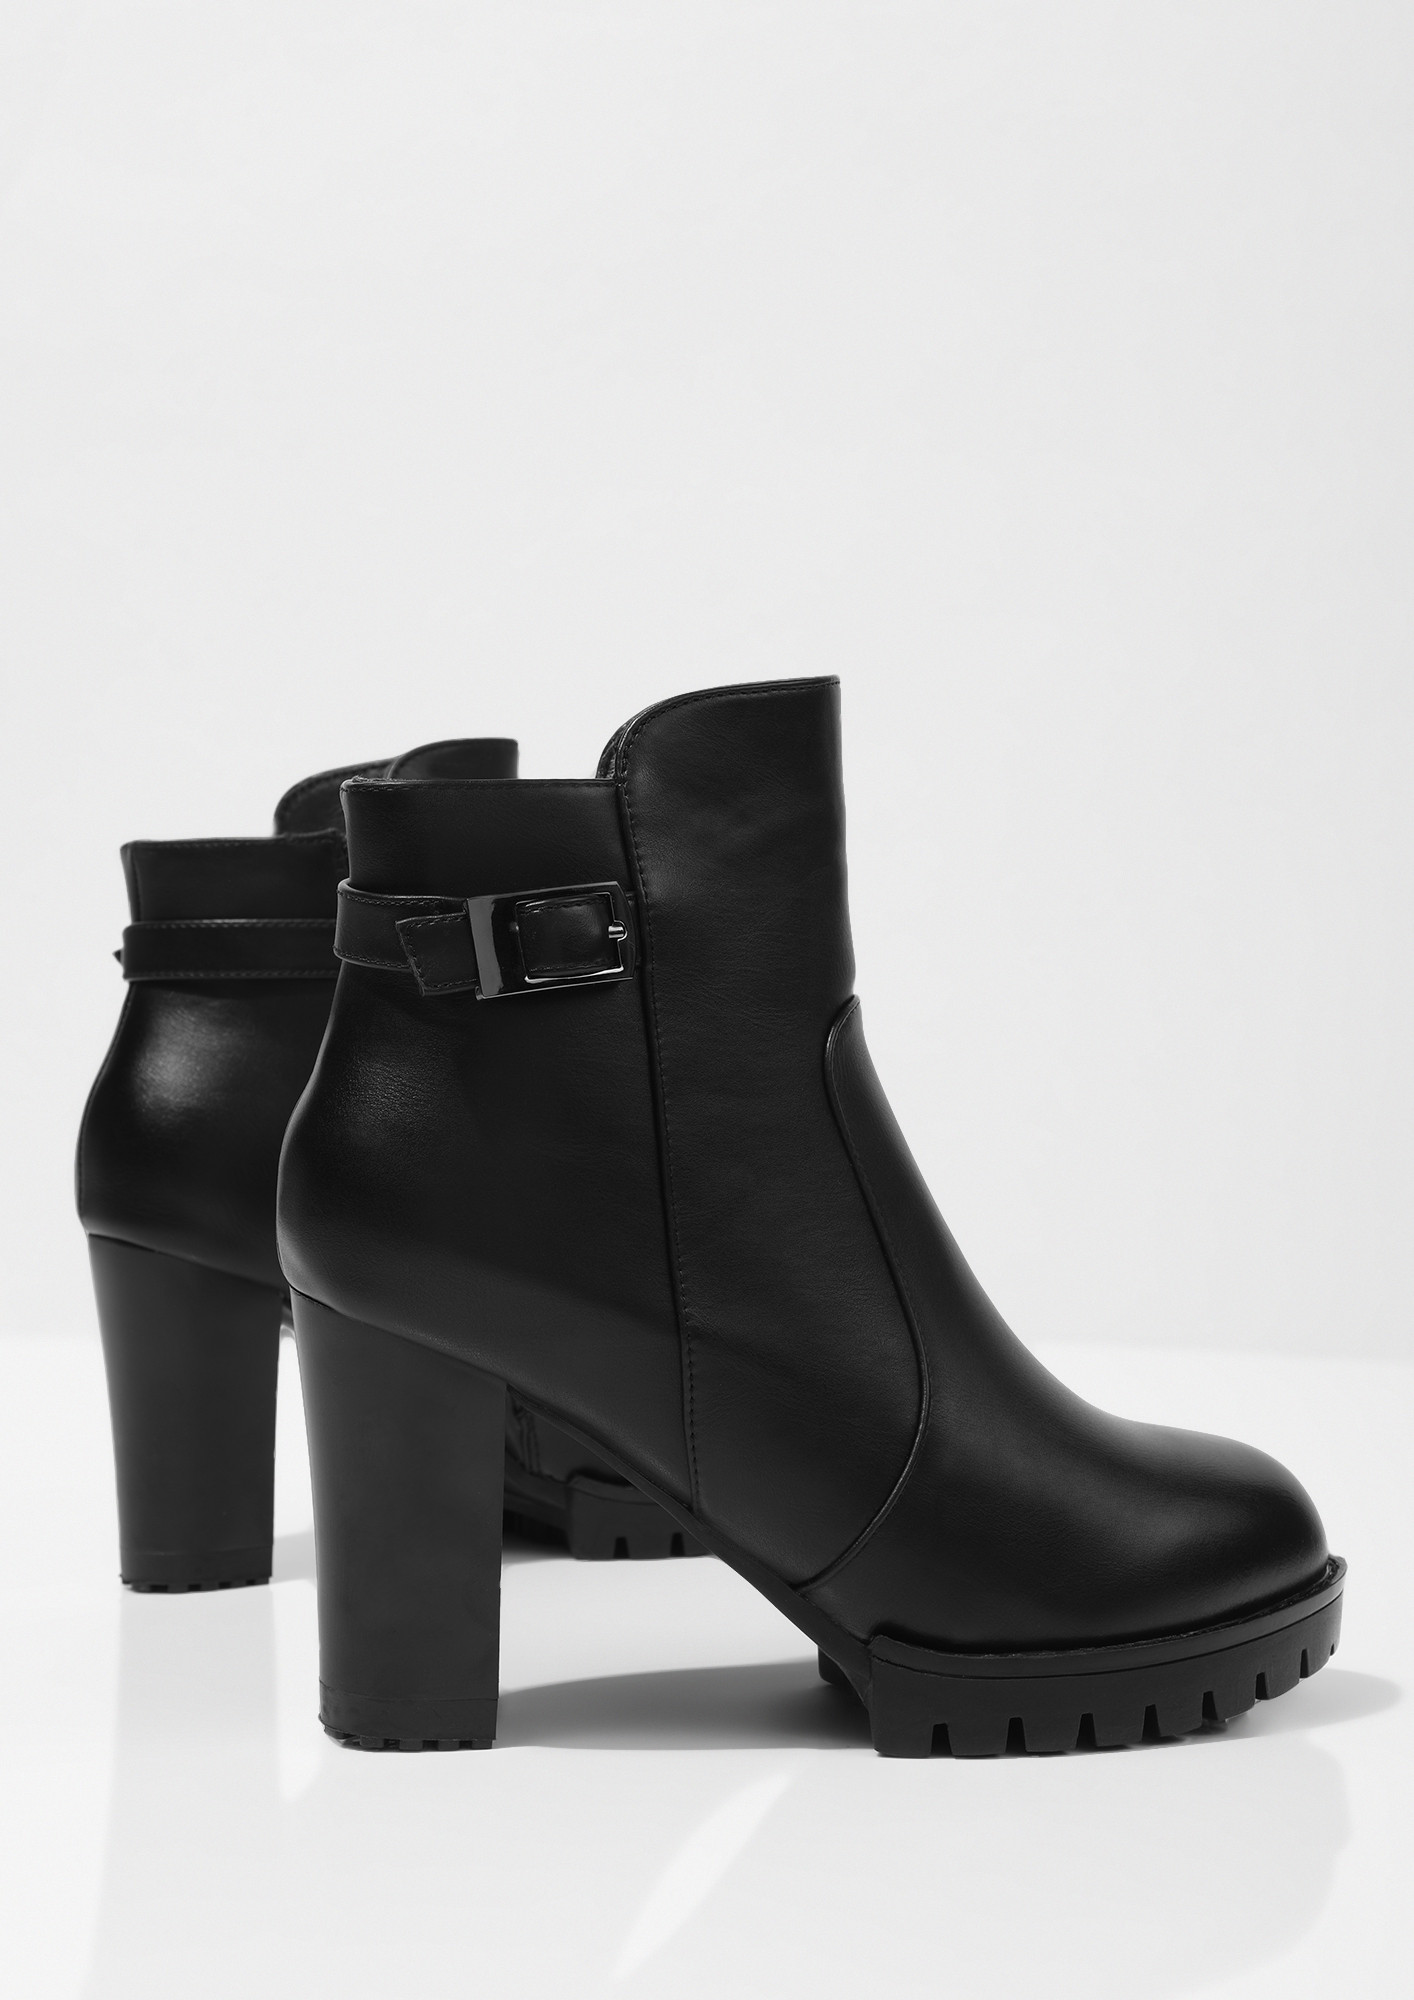 The 100 Best High Heeled Boots for Fall | Teen Vogue